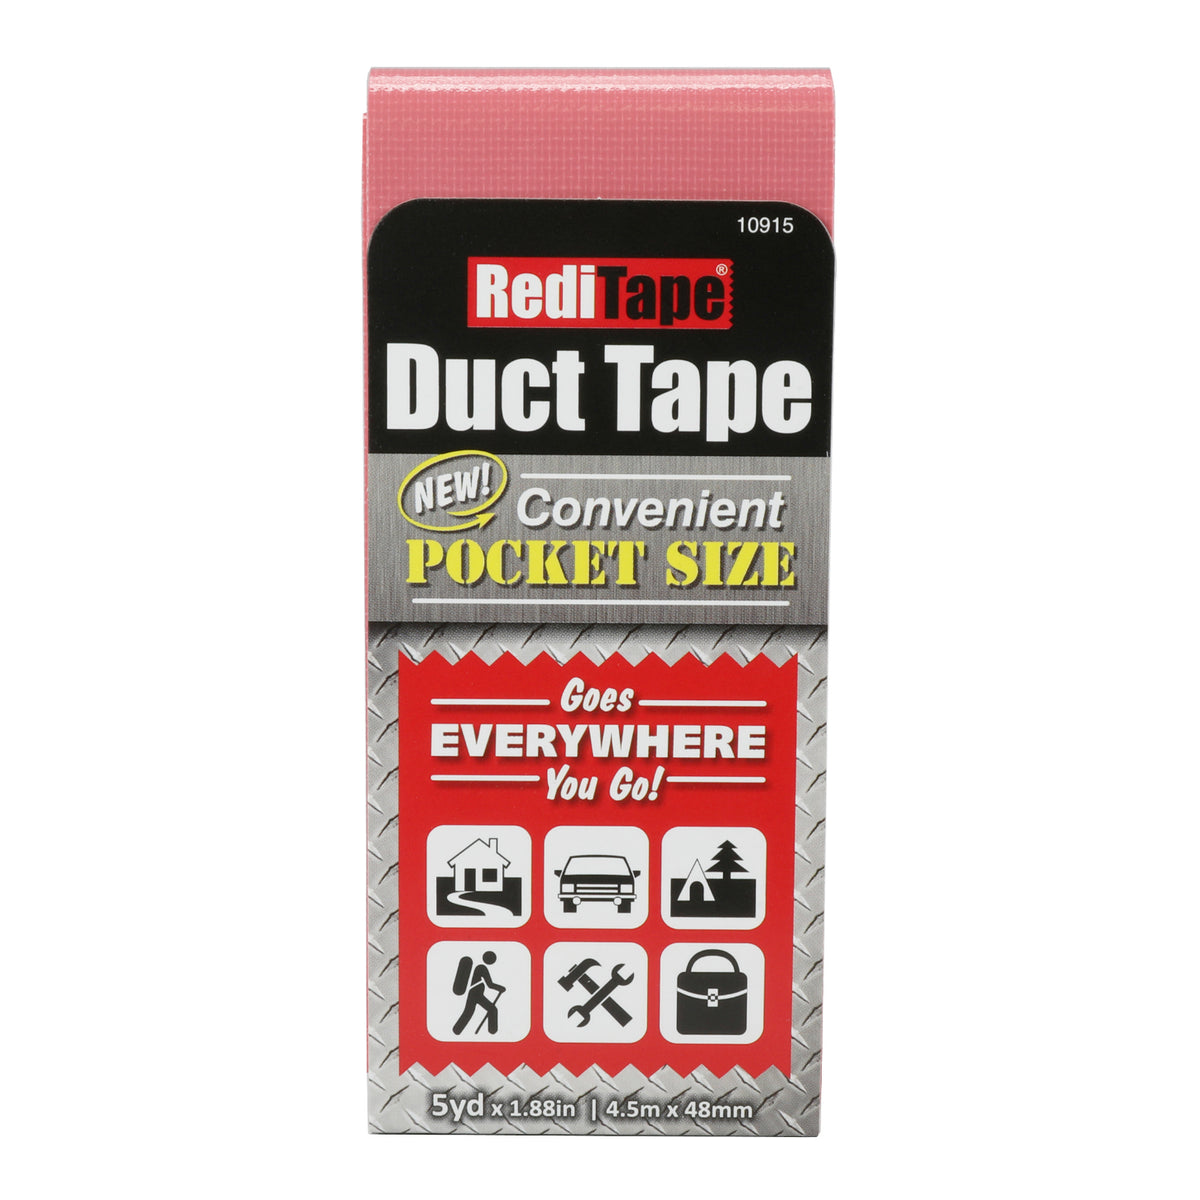 RediTape 10915 Pocket Size Duct Tape, Pink, 5 Yd x 1.88"